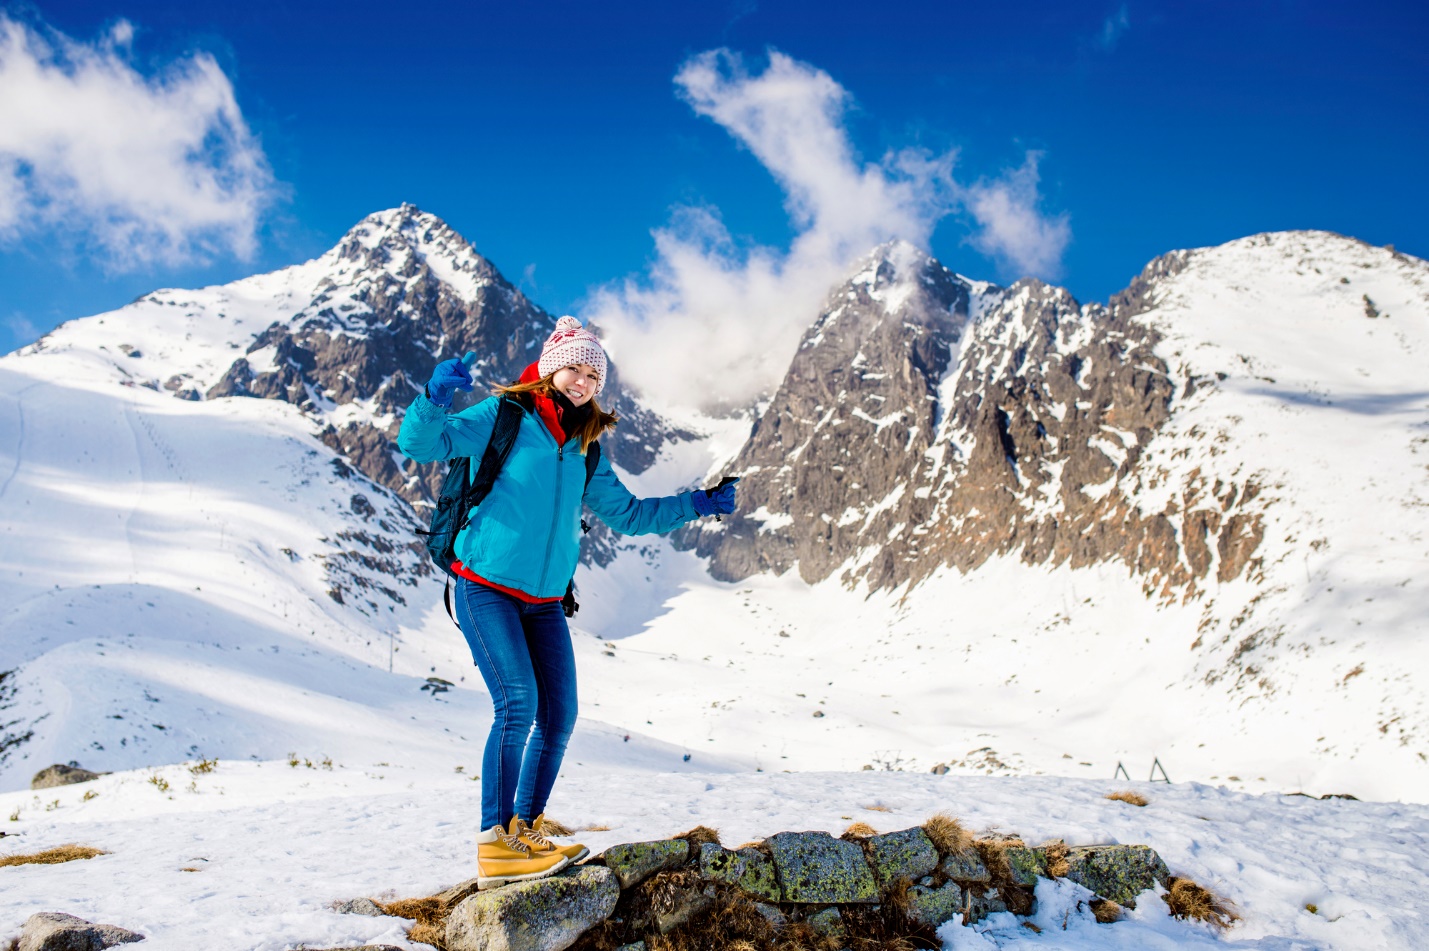 A person standing on a snowy mountain

Description automatically generated with medium confidence